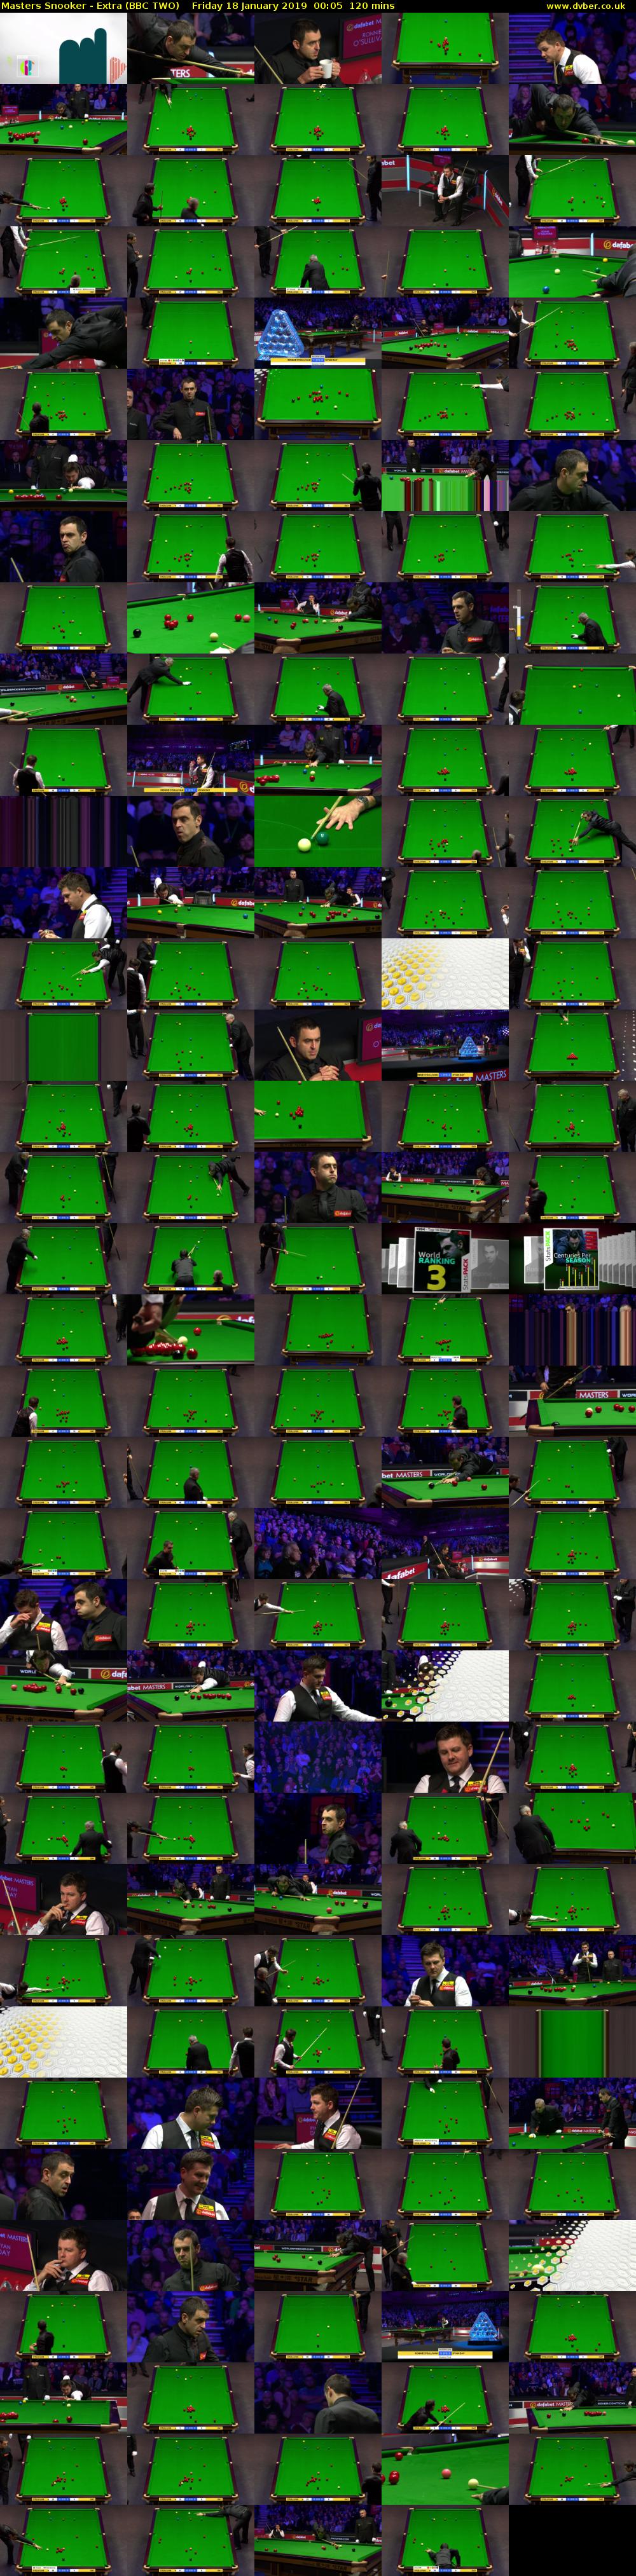 Masters Snooker - Extra (BBC TWO) Friday 18 January 2019 00:05 - 02:05